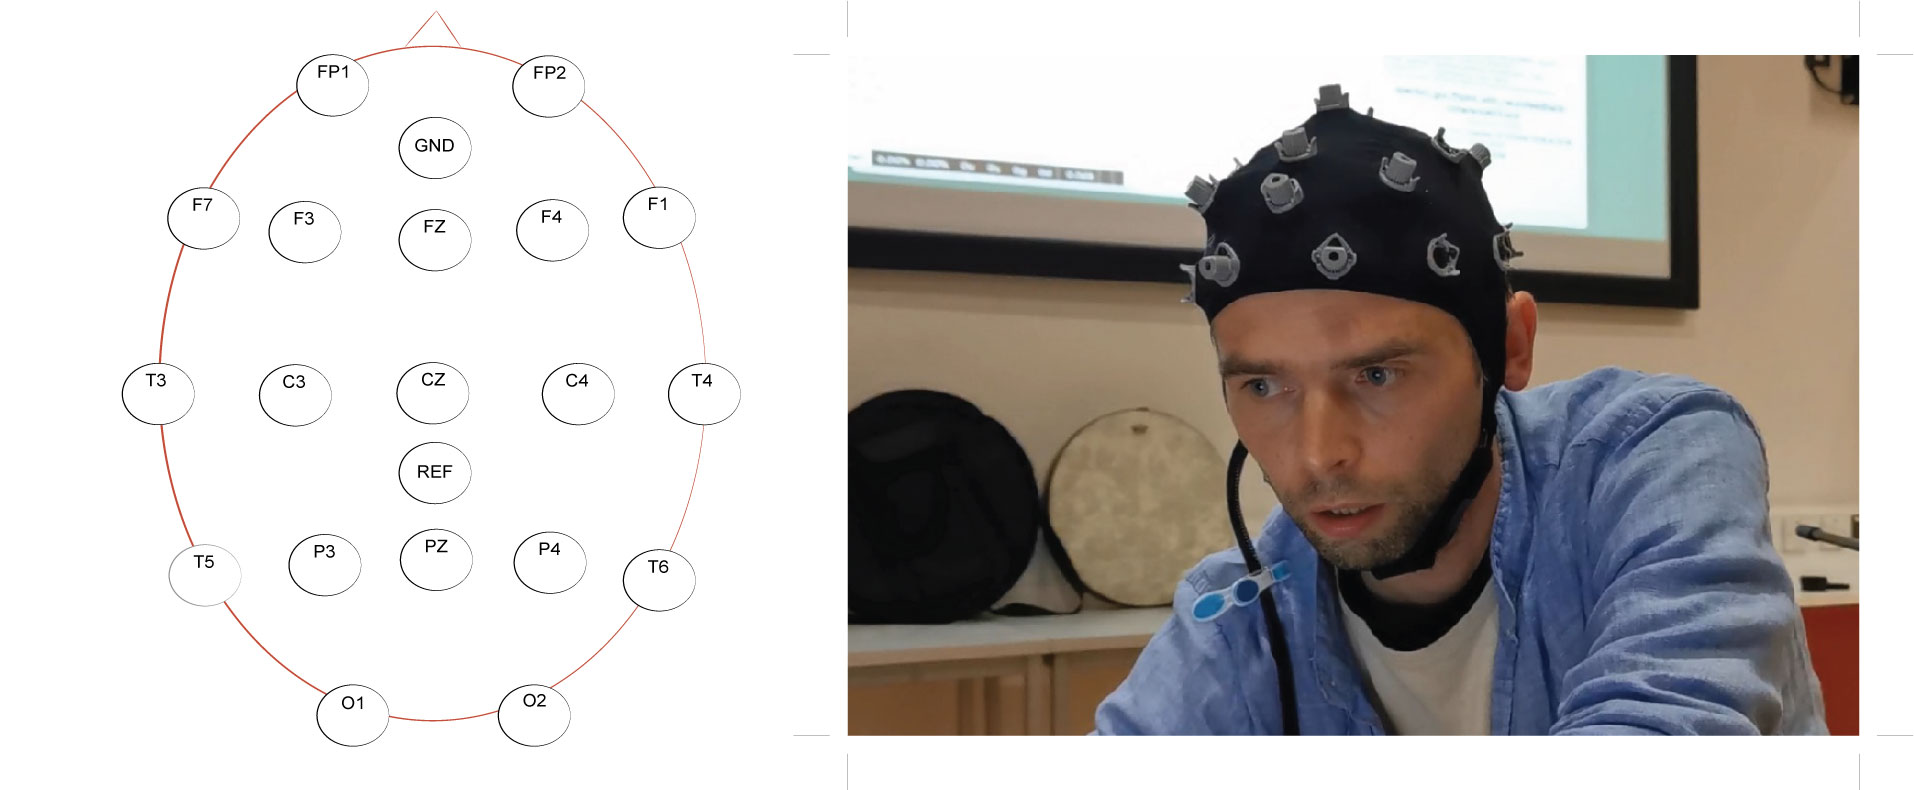 EEG electrode placements with the 10-20 system available on the gel-free cap used with the BCMI-2 system (left) and a photo of this cap on my head recording eight active electrodes (right). Caps can read pre-frontal (FP), frontal (F), temporal (T), parietal (P), occipital (O), and central (C) areas of the brain.